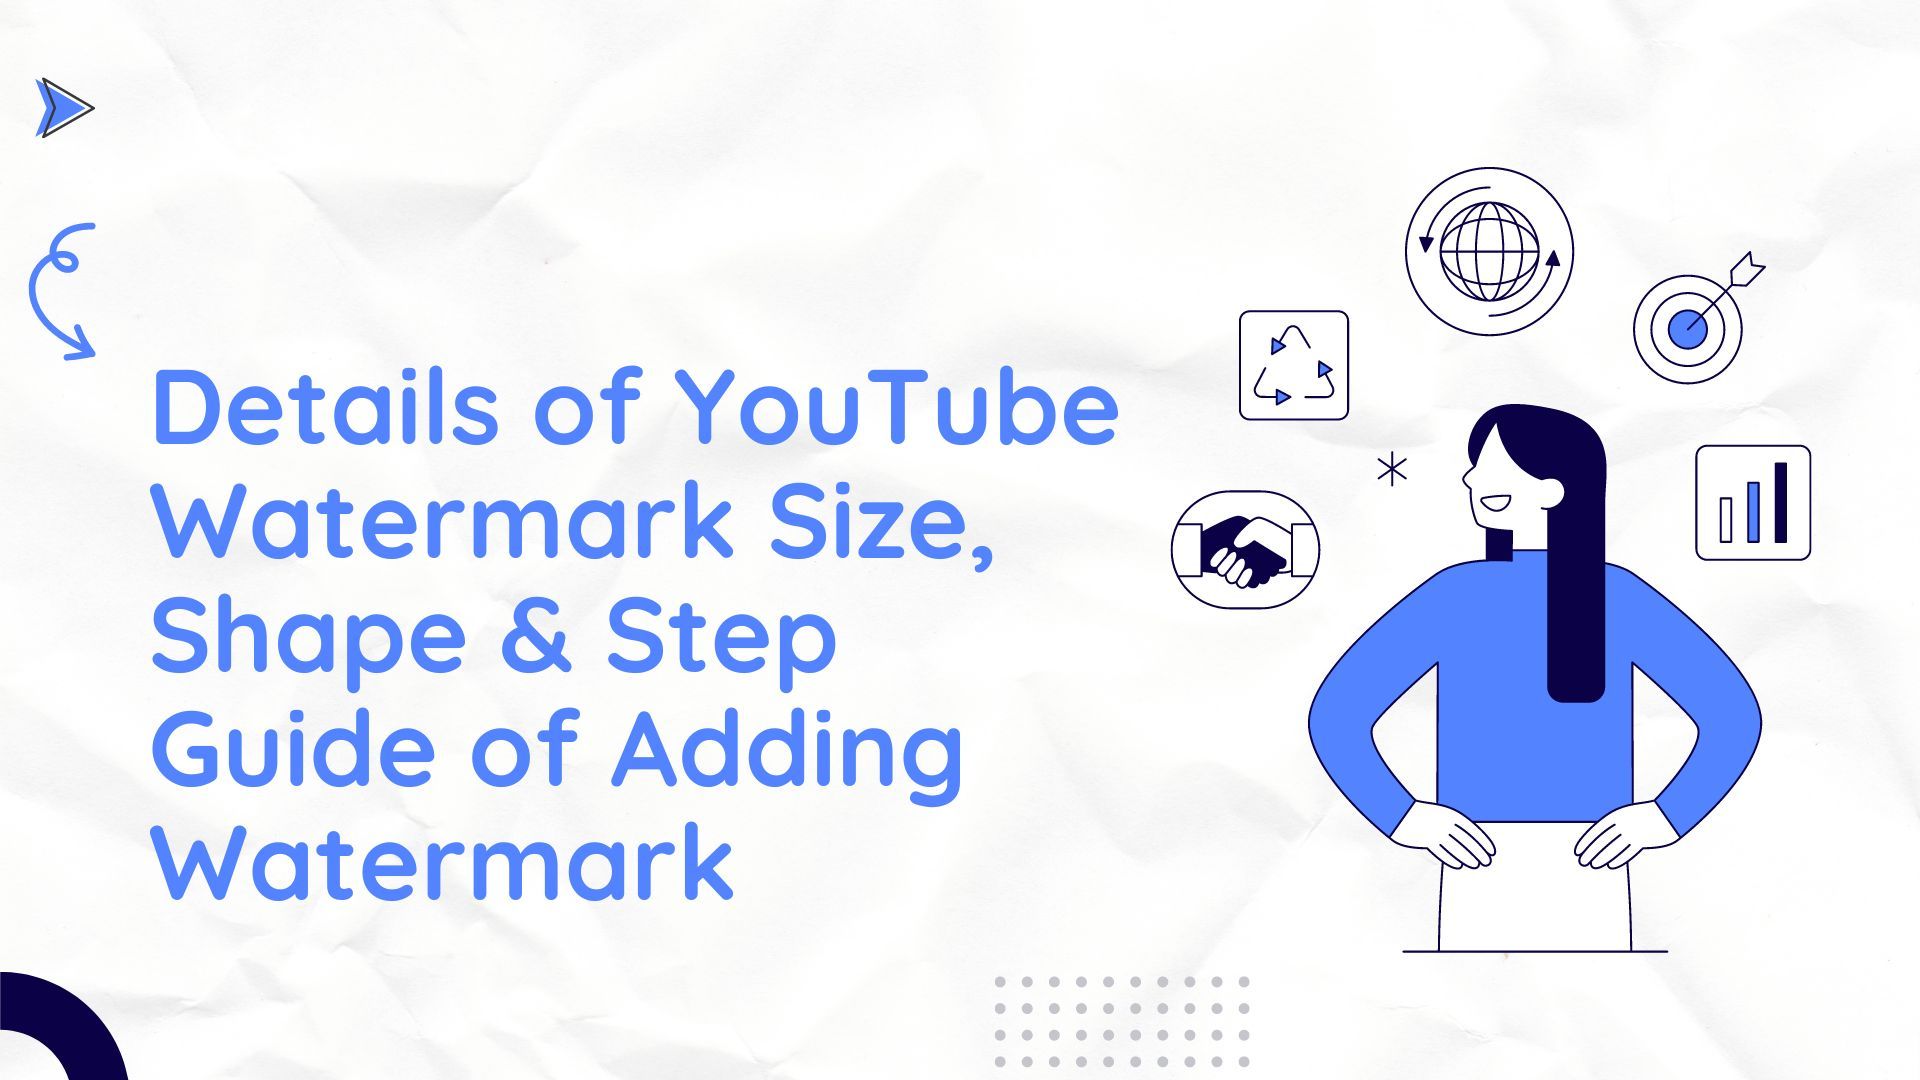 Details of YouTube Watermark Size, Shape & Step Guide of Adding Watermark